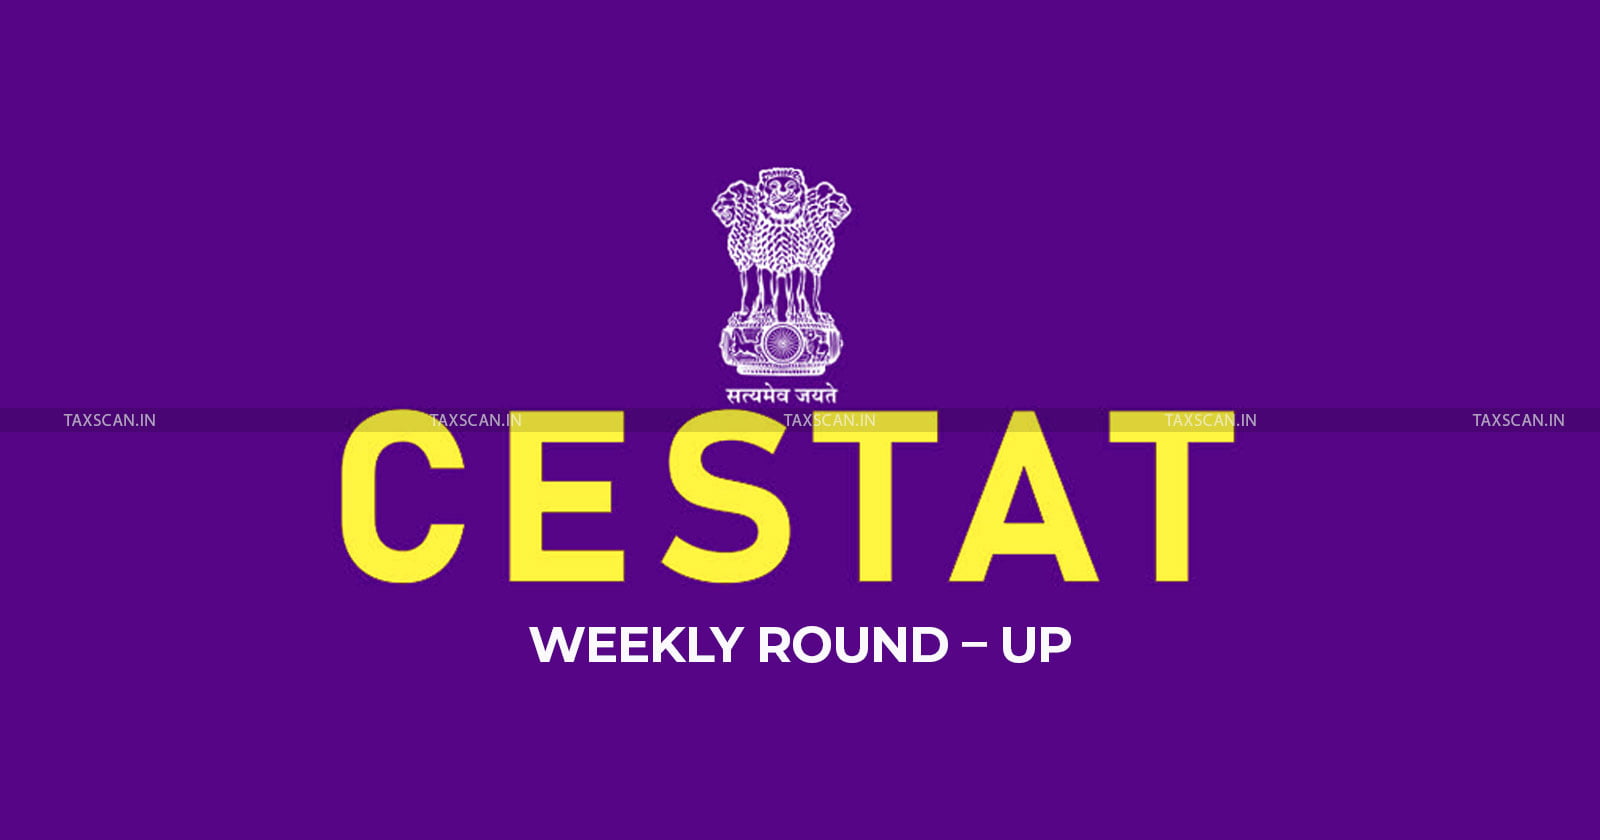 CESTAT - WEEKLY - ROUND – UP - TAXSCAN